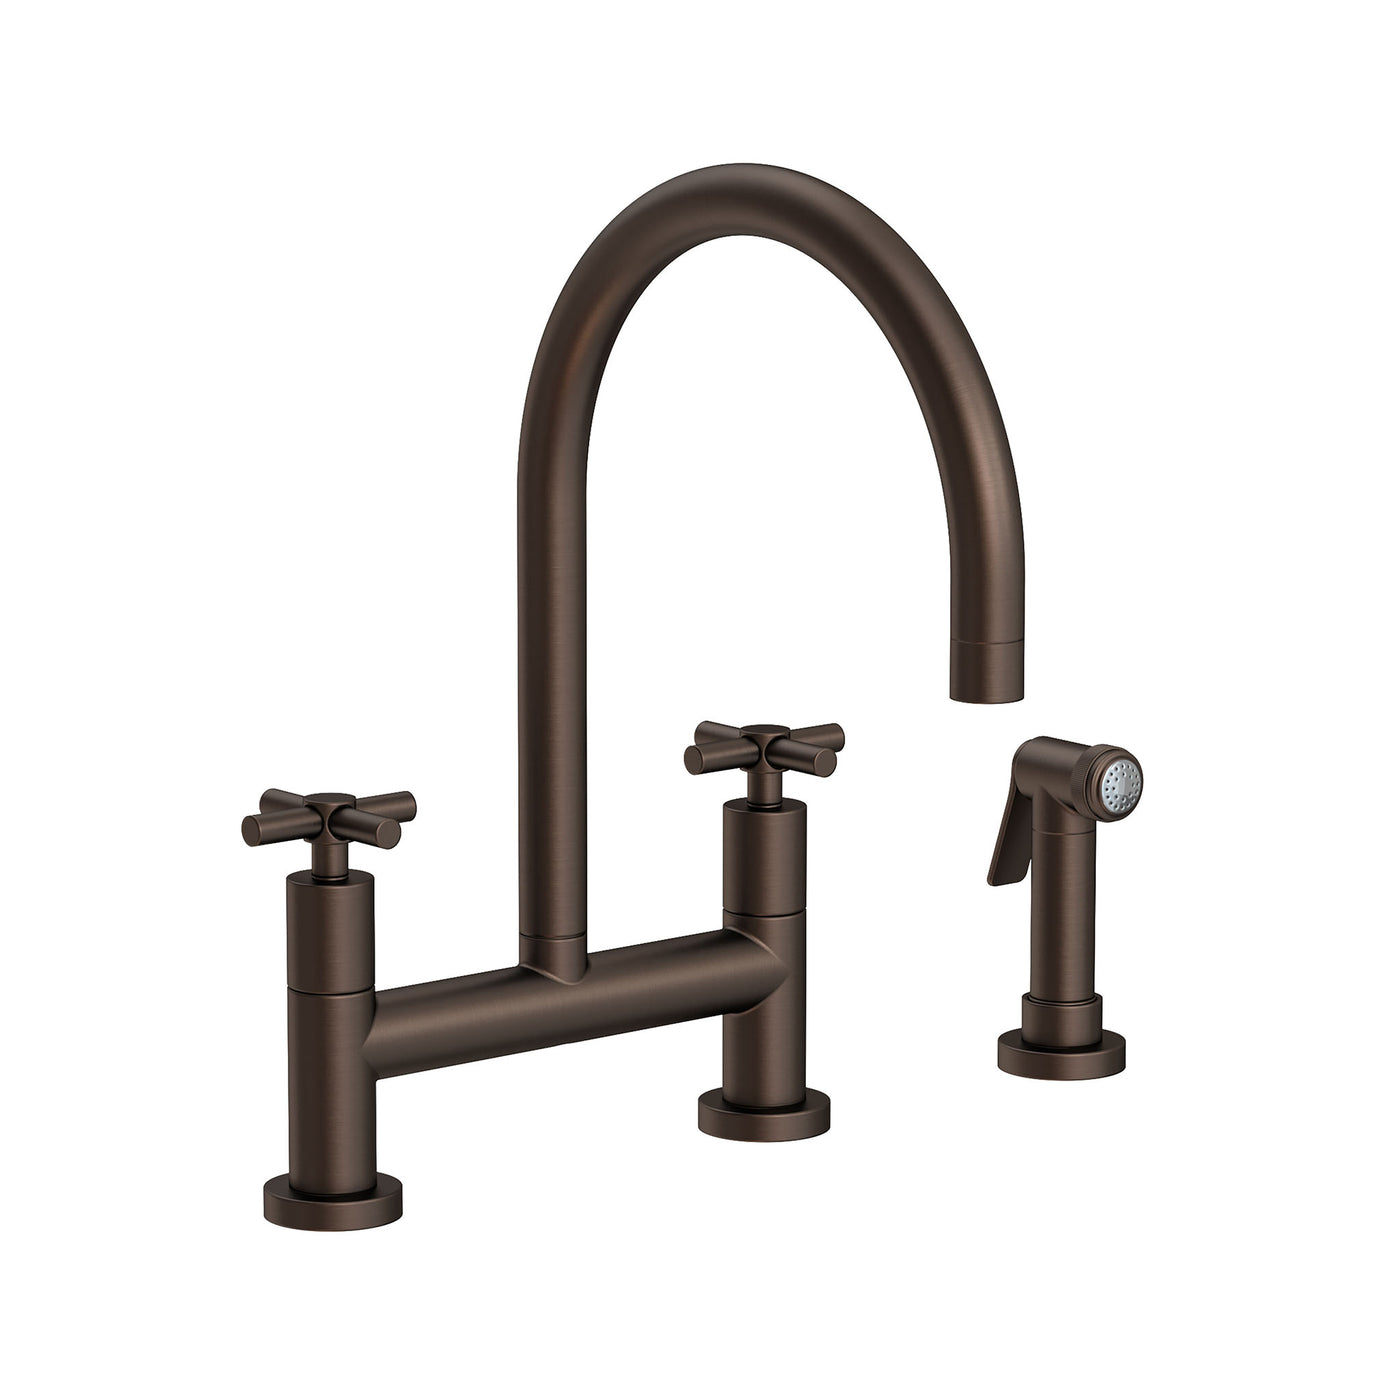 East Linear Kitchen Bridge Faucet with Side Spray